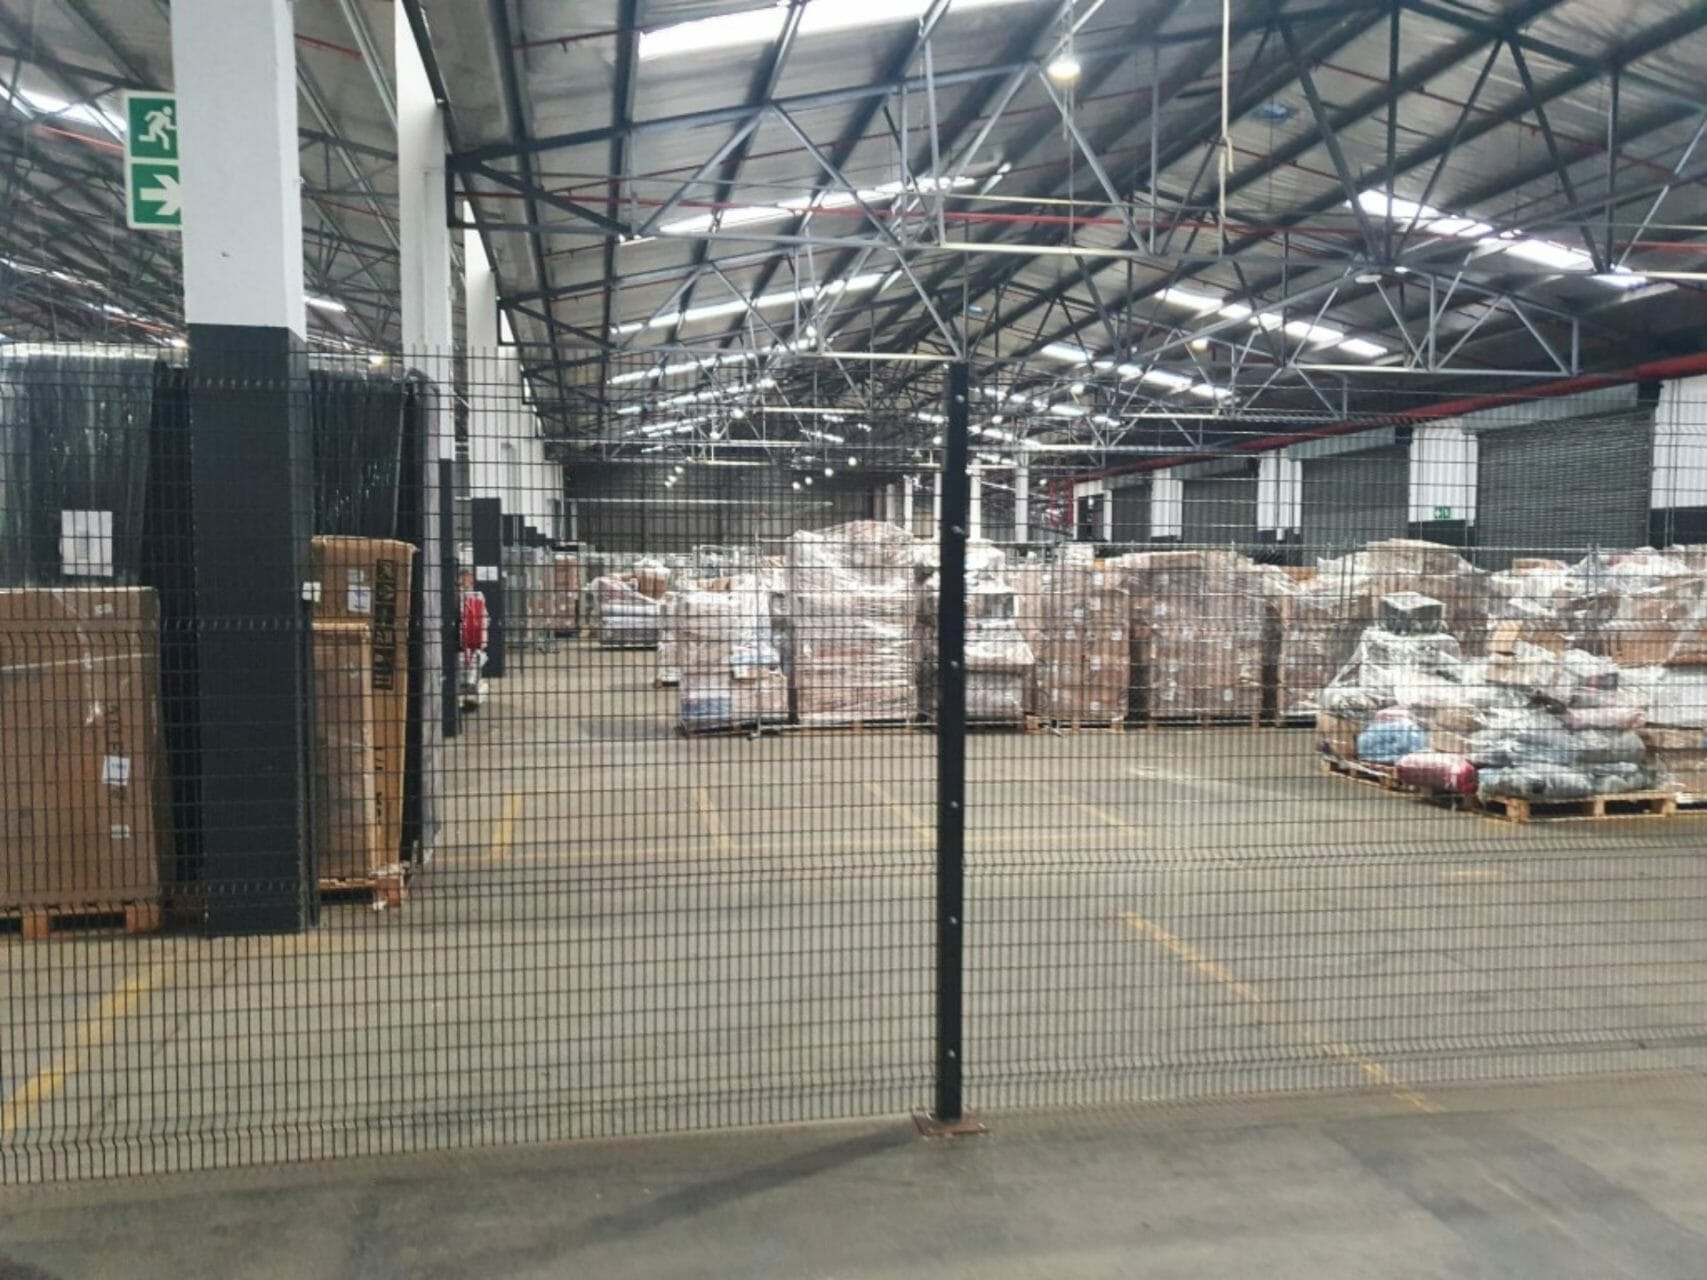 4,265m² – Distribution Centre warehouse to let in Chain Avenue Montague Gardens